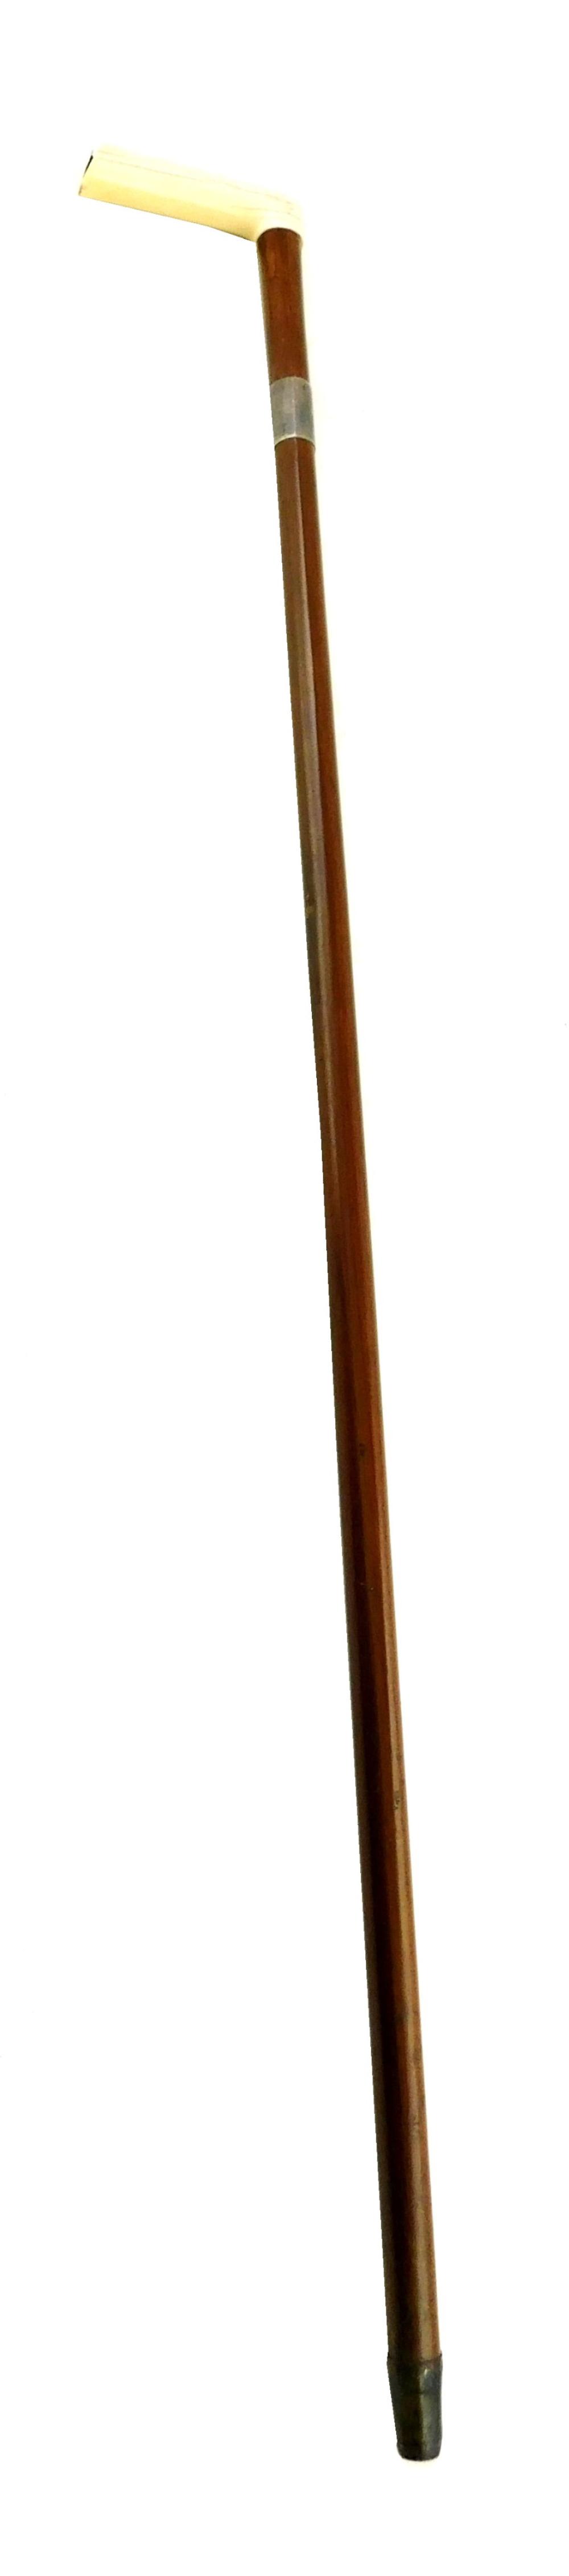 EARLY 19TH C WALKING STICK WITH 31ea03